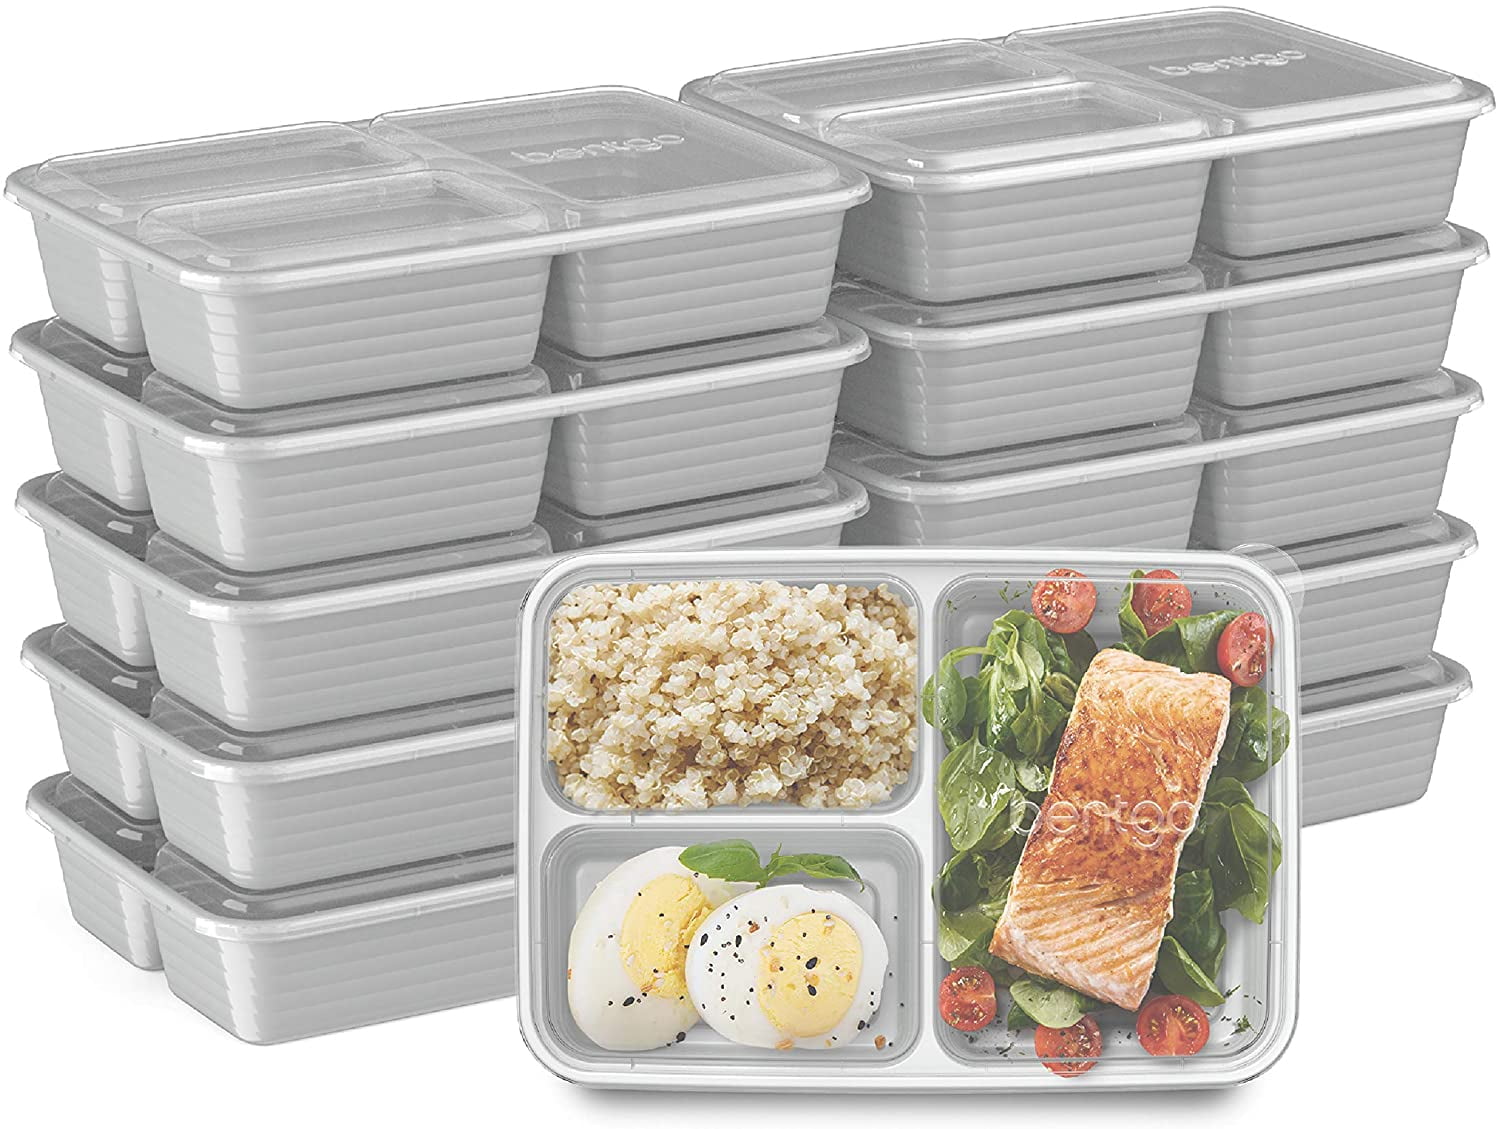 Rich Shades Microwaveable 1 2 Bentgo® Prep 60-Piece Meal Prep Kit BPA-Free Reusable Freezer & Dishwasher Safe Storage Containers & 3-Compartment Containers with Custom Fit Lids Durable 